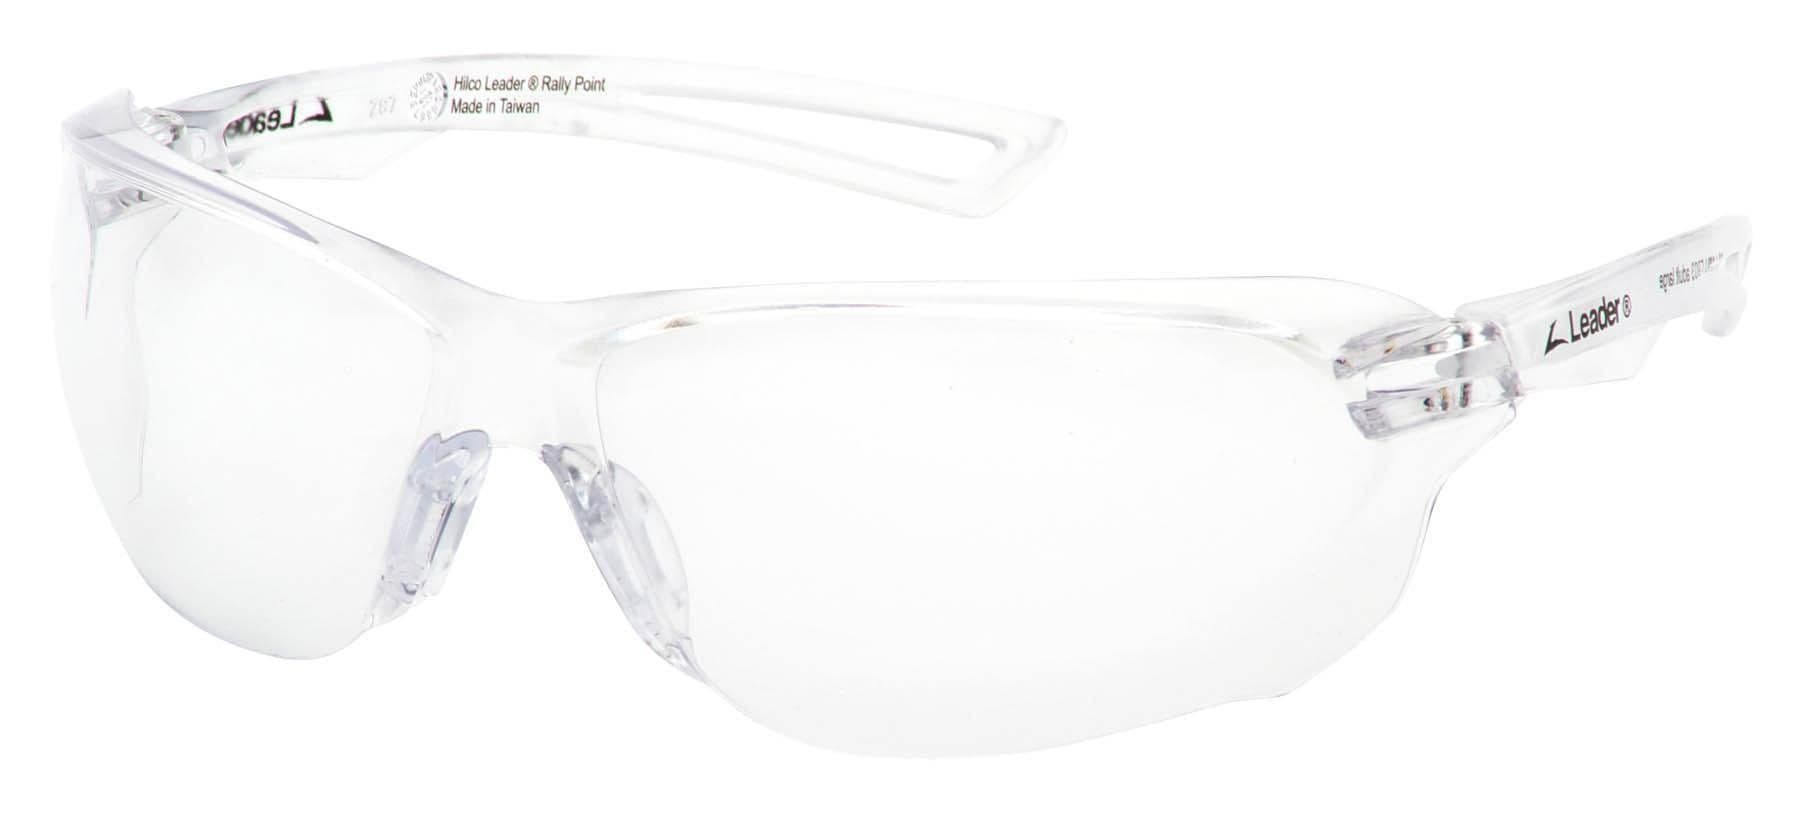 Hilco Leader Rally Point Sports Glasses (sale)